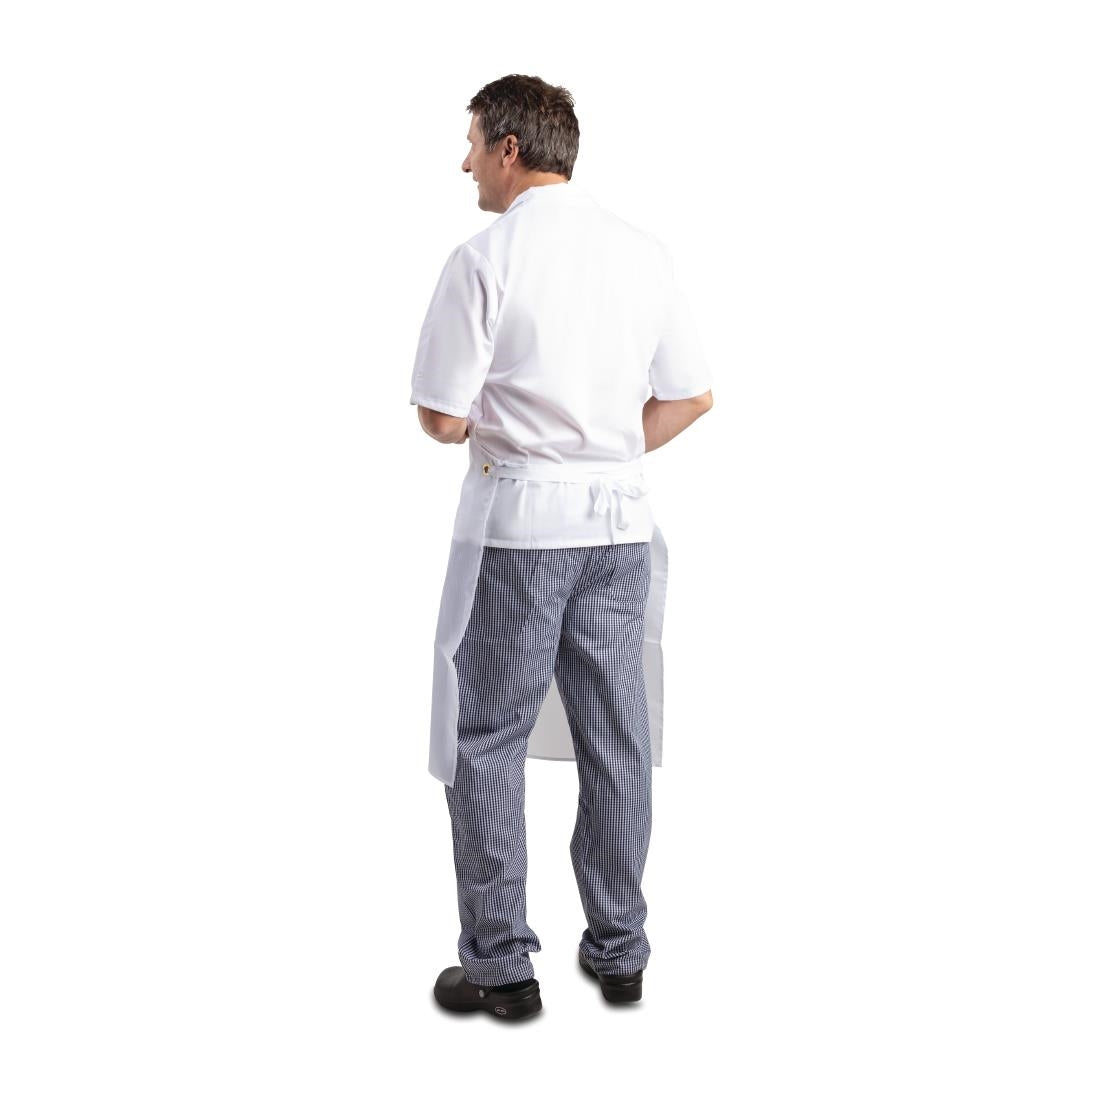 A897 Whites Water Resistant Bib Apron White JD Catering Equipment Solutions Ltd